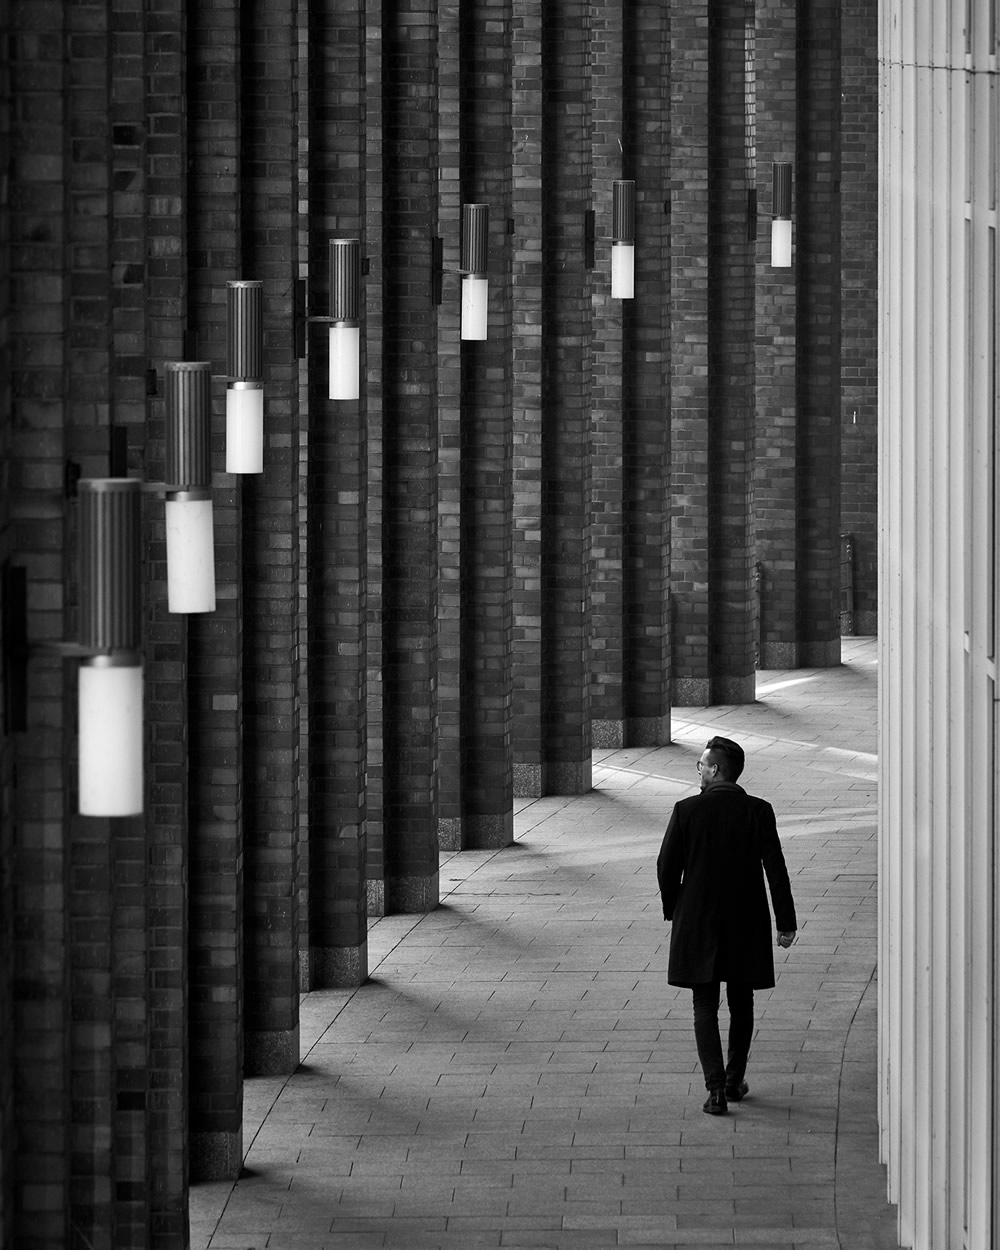 Stripes And Lines: Street Photography Series By Alexander Schoenberg